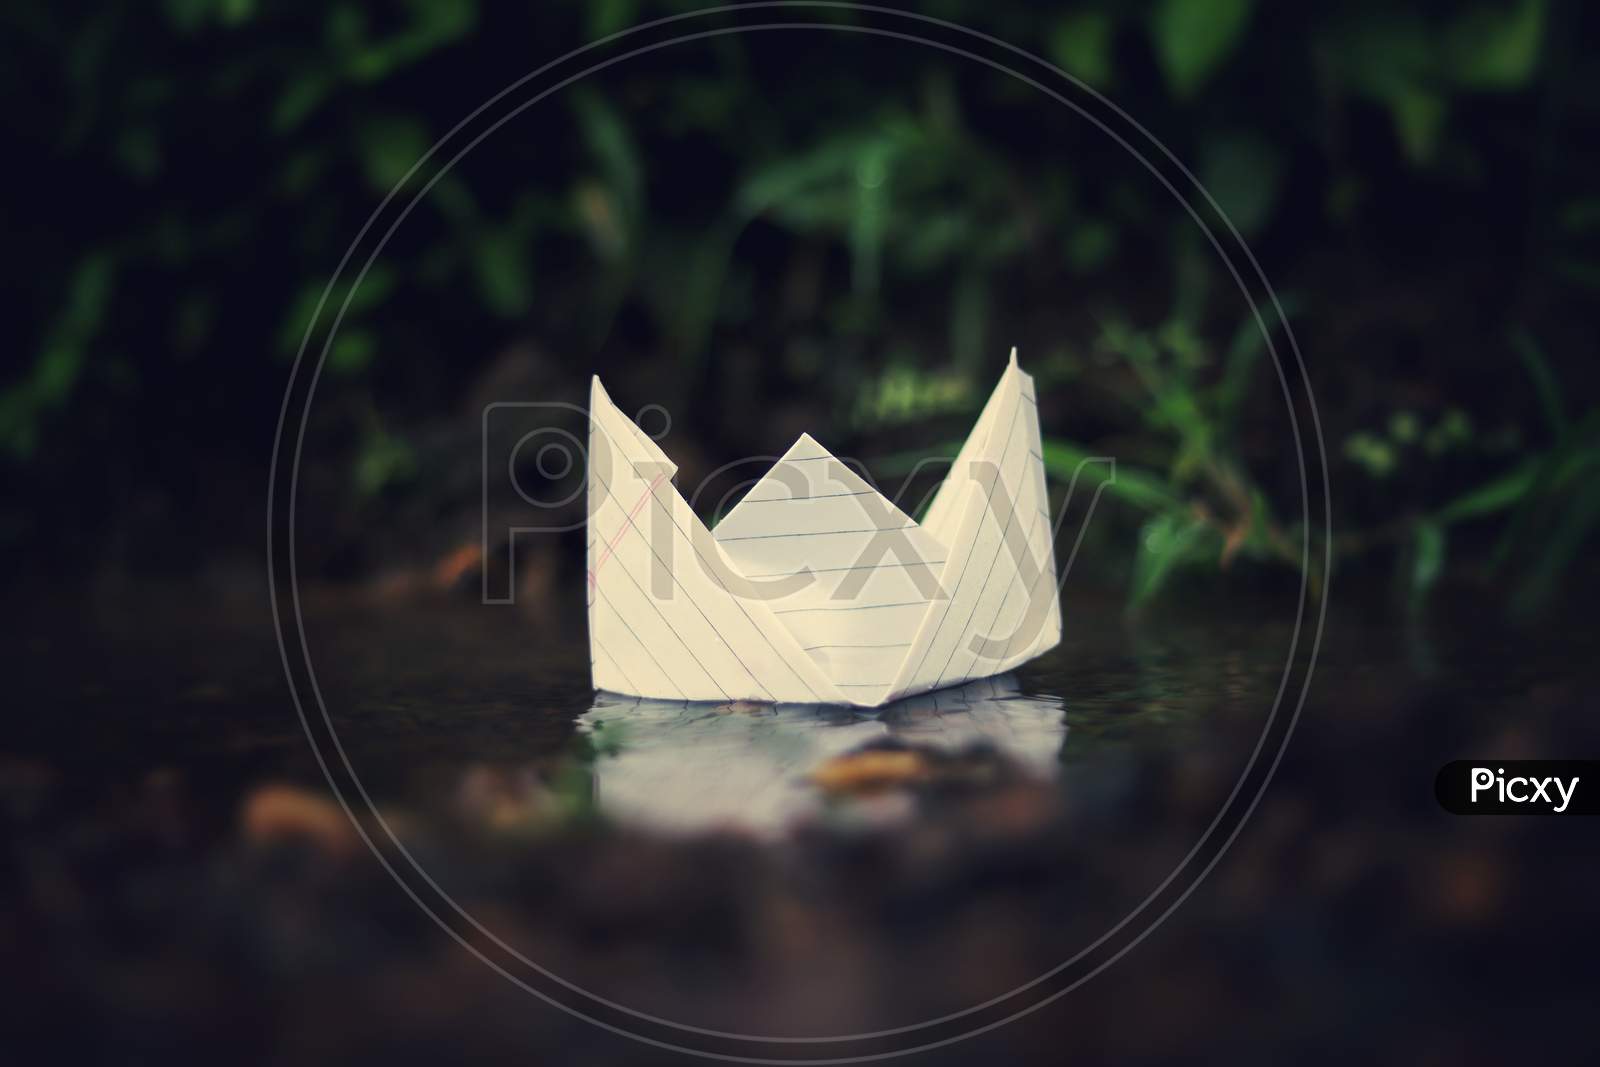 A small paper boat floating in the rainy water in rainy season with green nature background